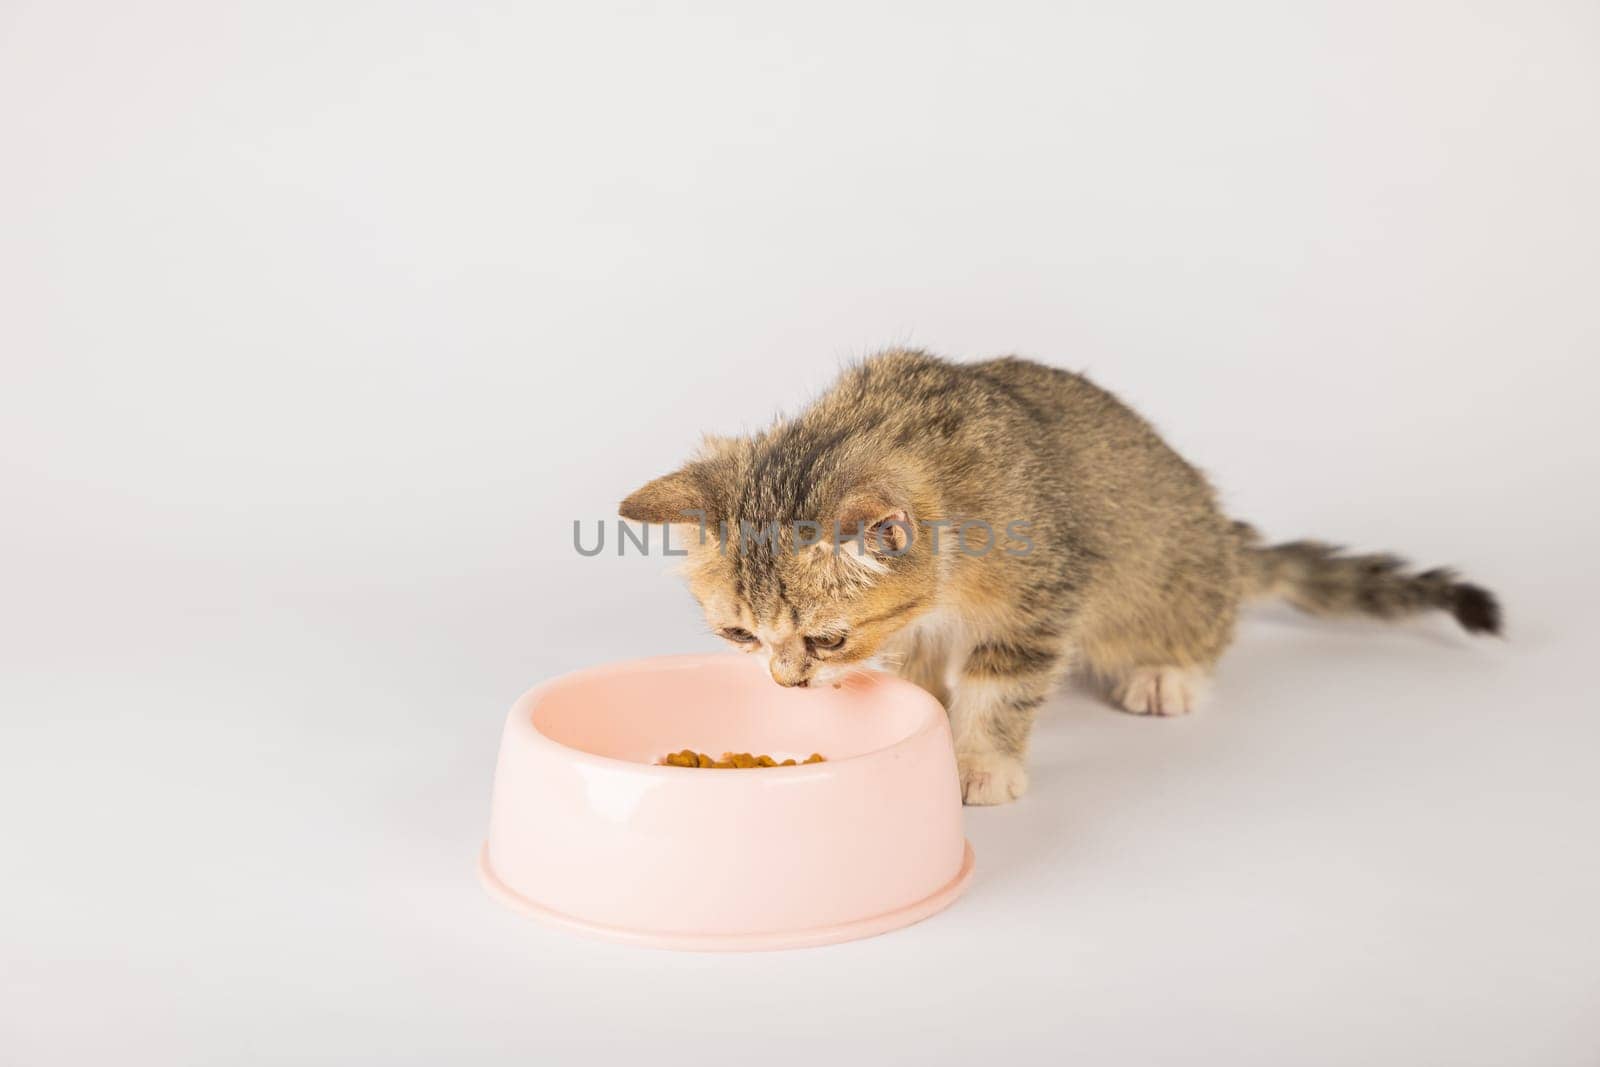 A charming tabby cat isolated on a white background is seen sitting next to a food bowl on the floor eagerly eating its meal. The cat's small tongue and curious eye make this an adorable portrait. by Sorapop